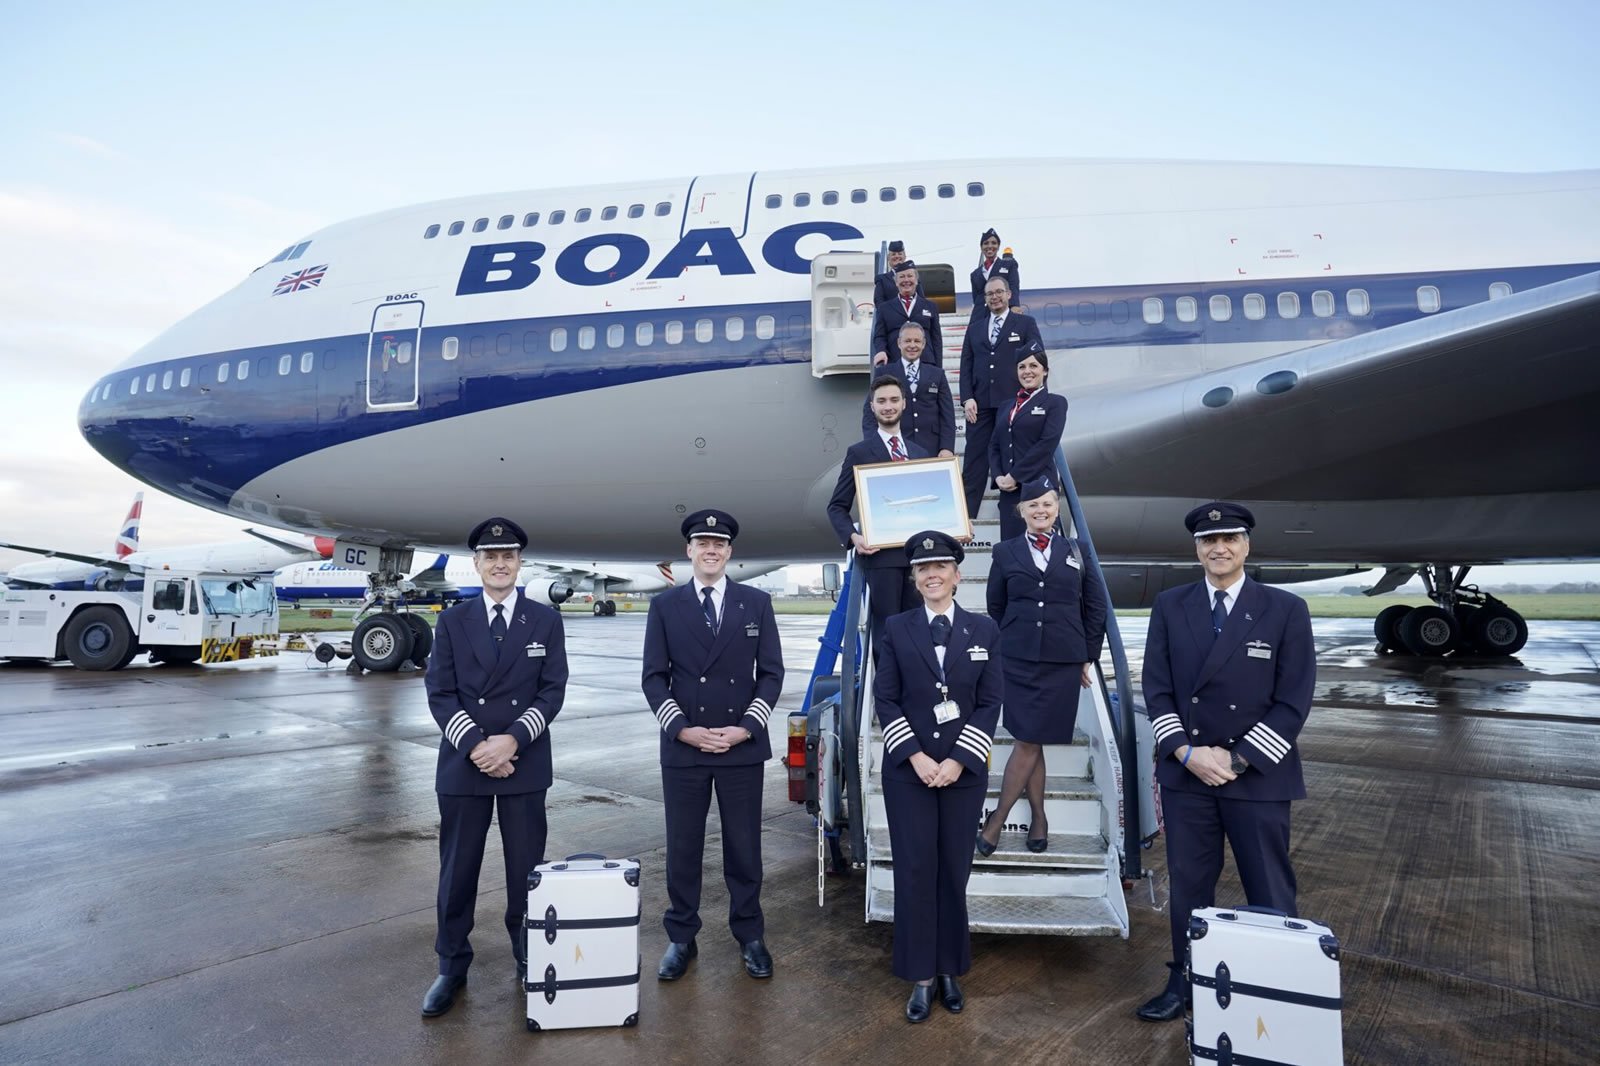 British Airways is selling $2,00 suitcases made from the parts of retired Boeing 747 jets